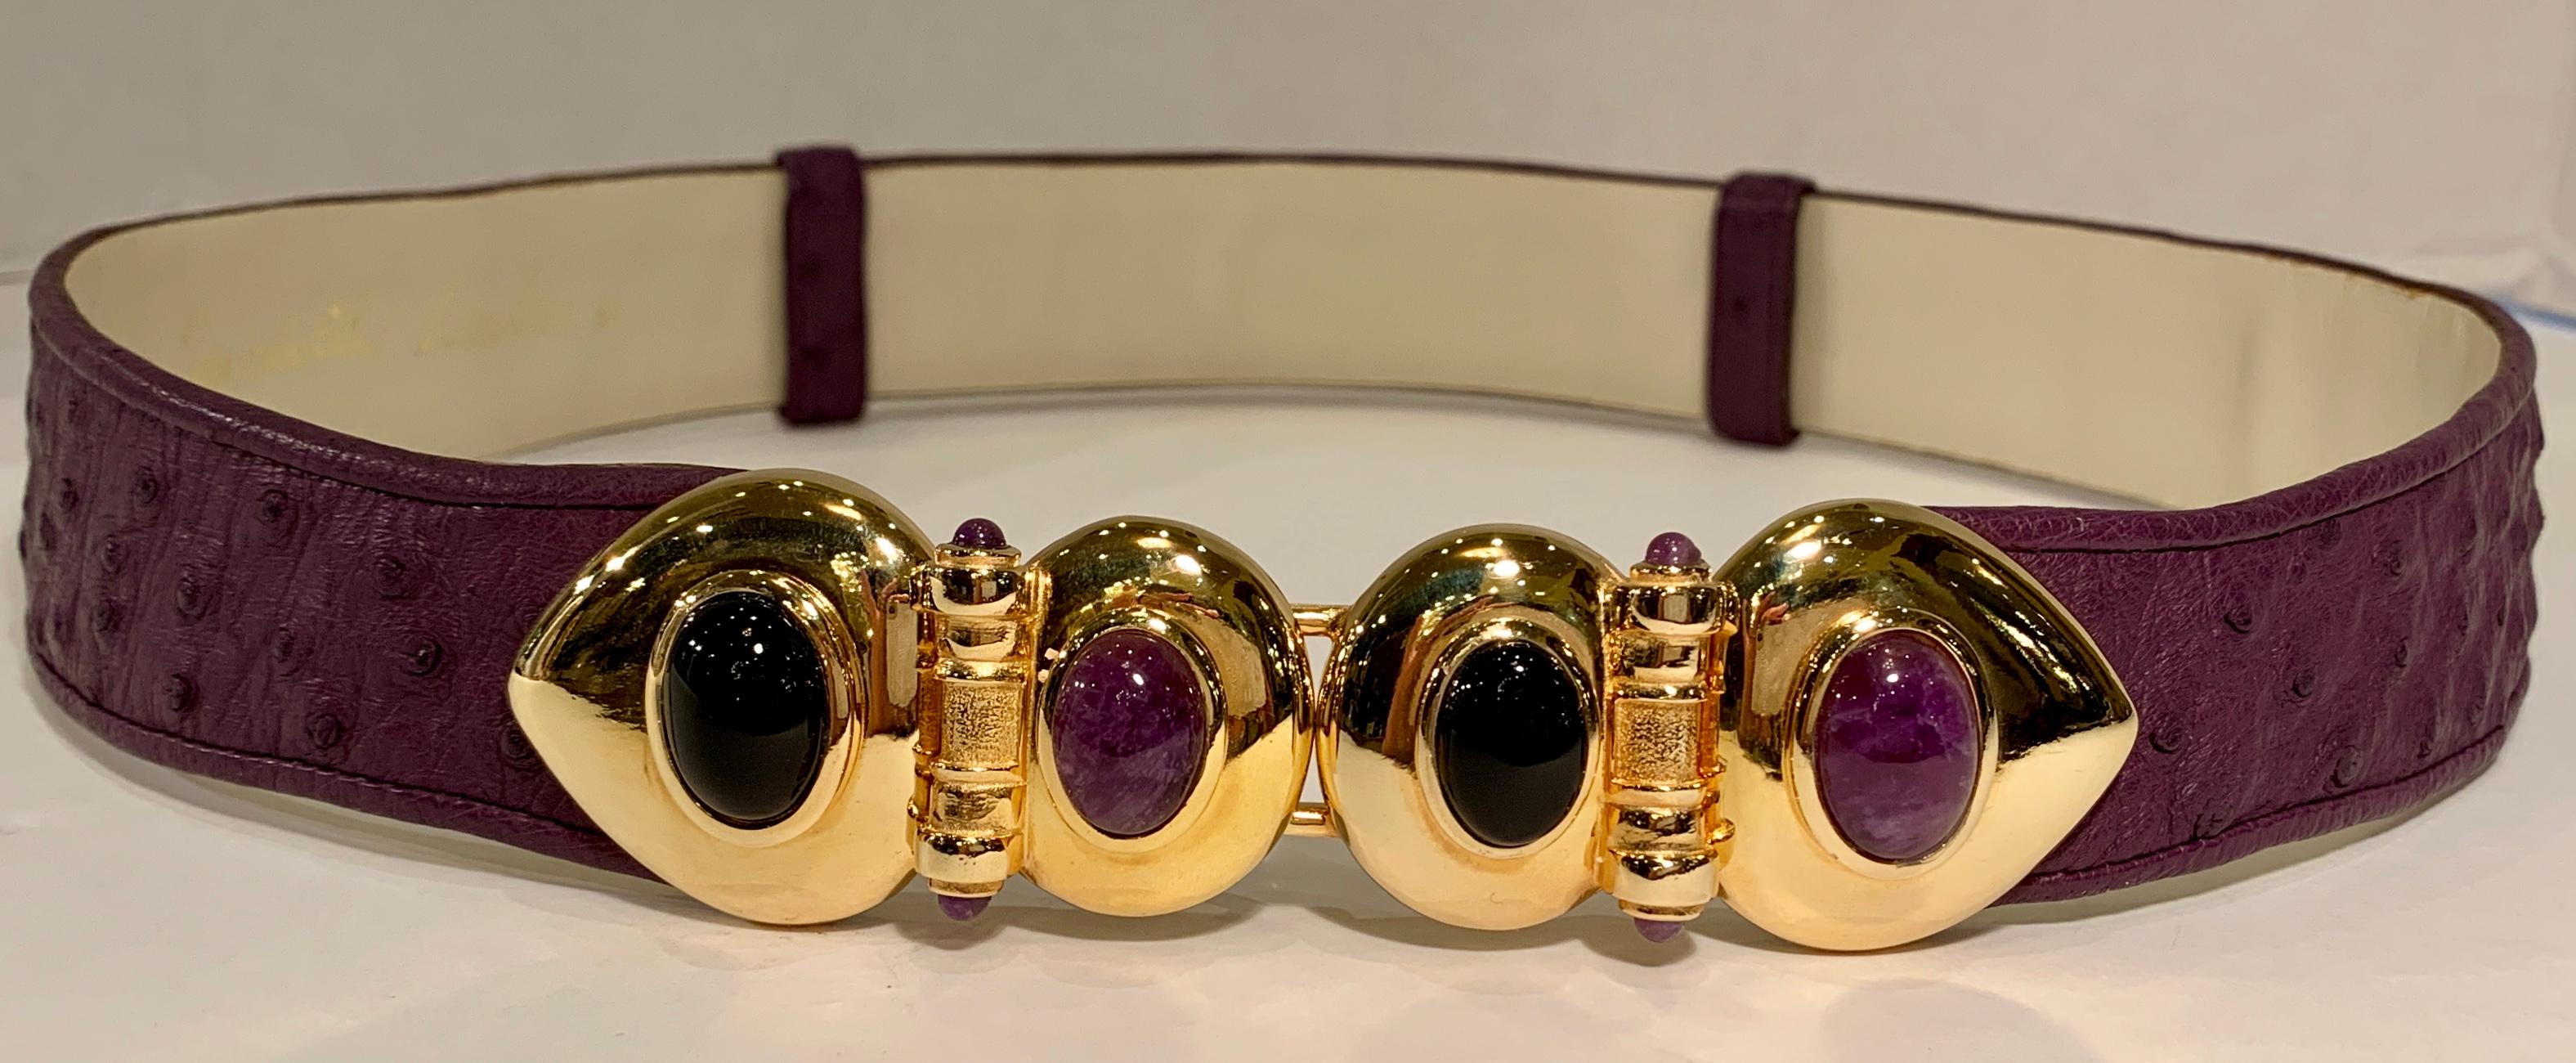 Known for her amazing purses, Judith Leiber’s creativity continued with accessories such as this beautiful estate adjustable belt from the 1980s with opulent semi-precious stone-studded, hinged gold-tone metal belt buckle. Adjustable belt is plum or